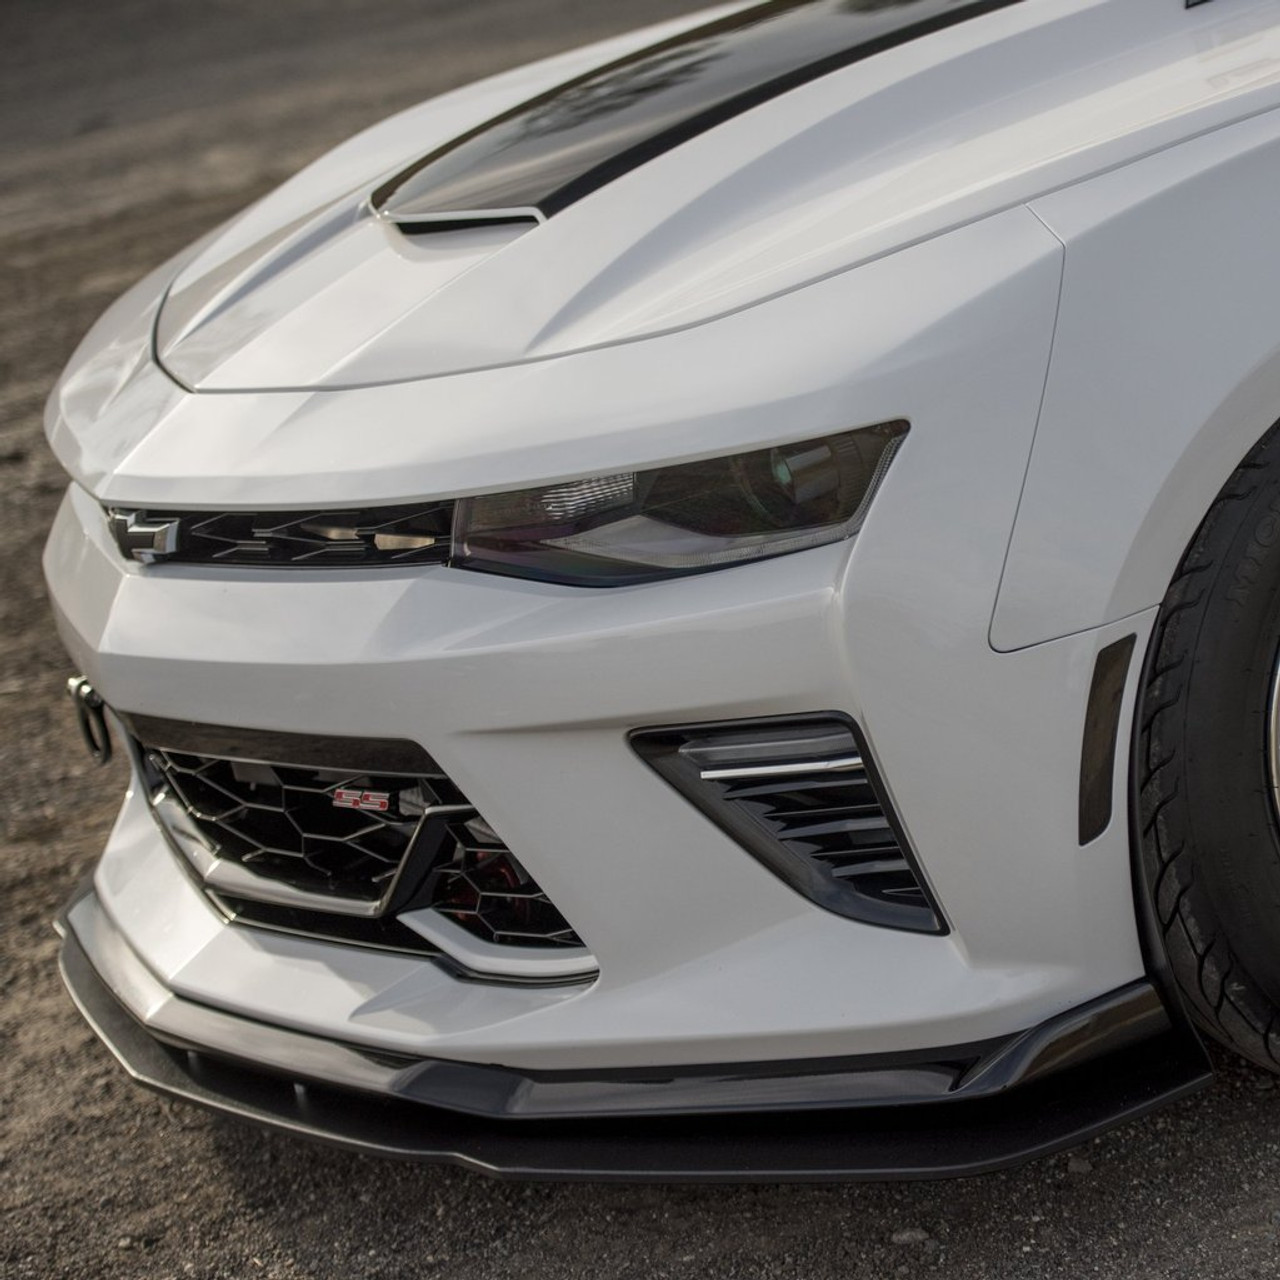 16-18 Camaro Fender Extension Body Kit, Full kit (Includes Front, Side and Rear)